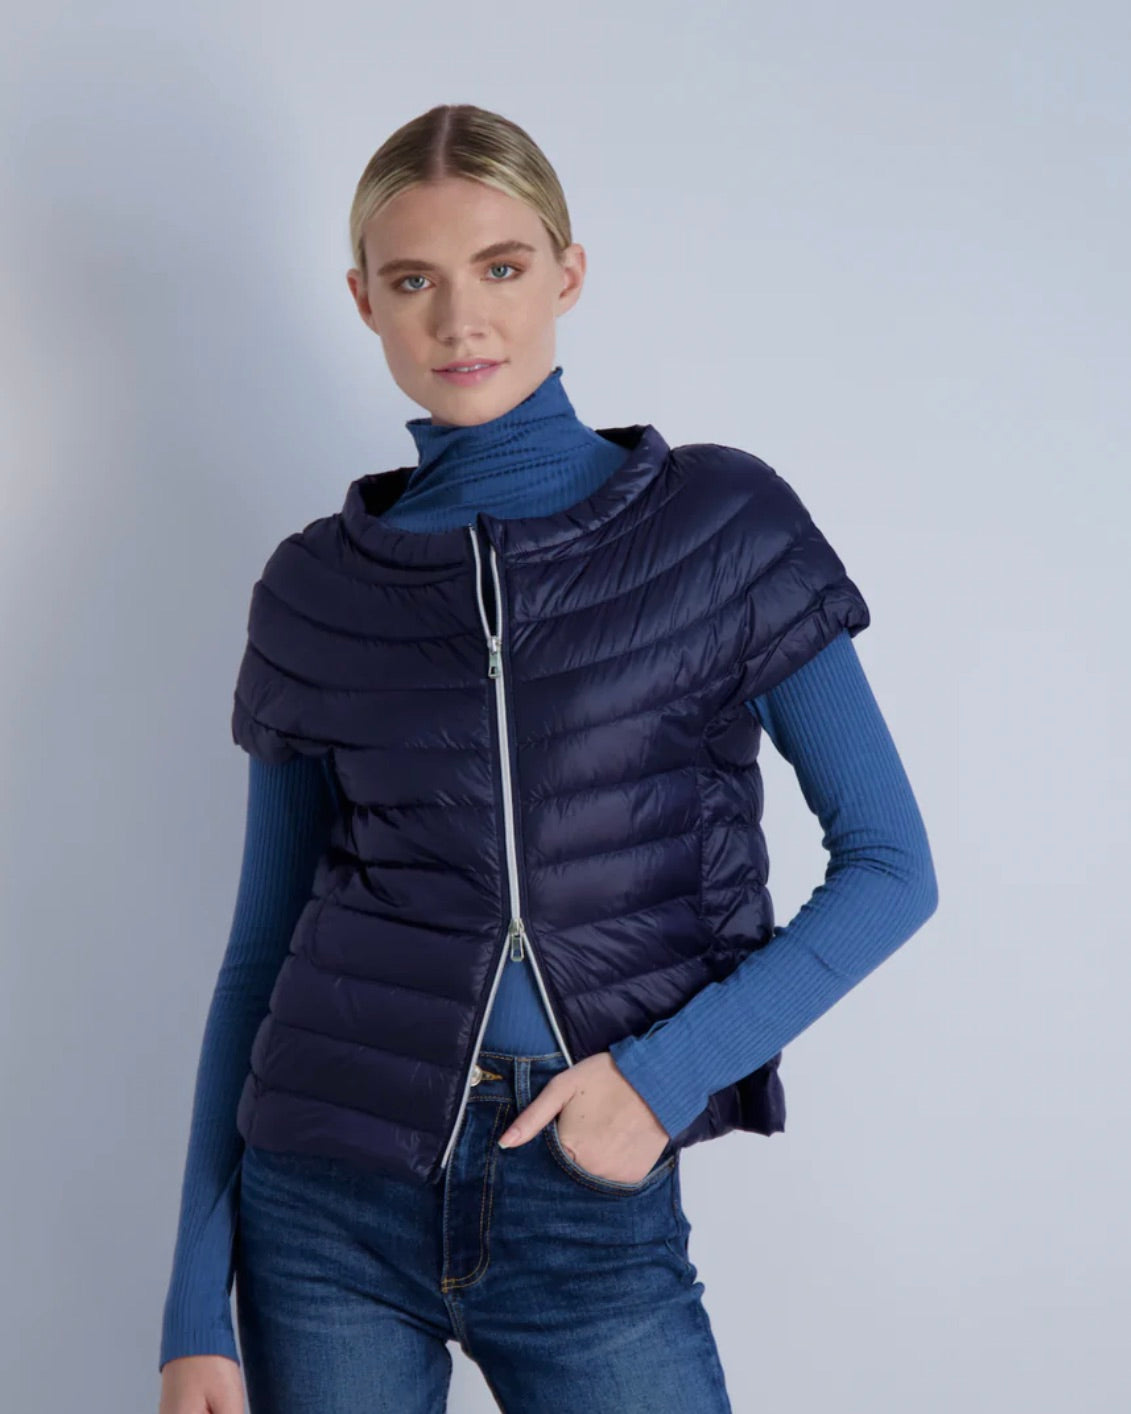 Model wearing Cotes of London Ink Navy St Ives Down Vest wearing jeans and a blue turtleneck on a light blue background